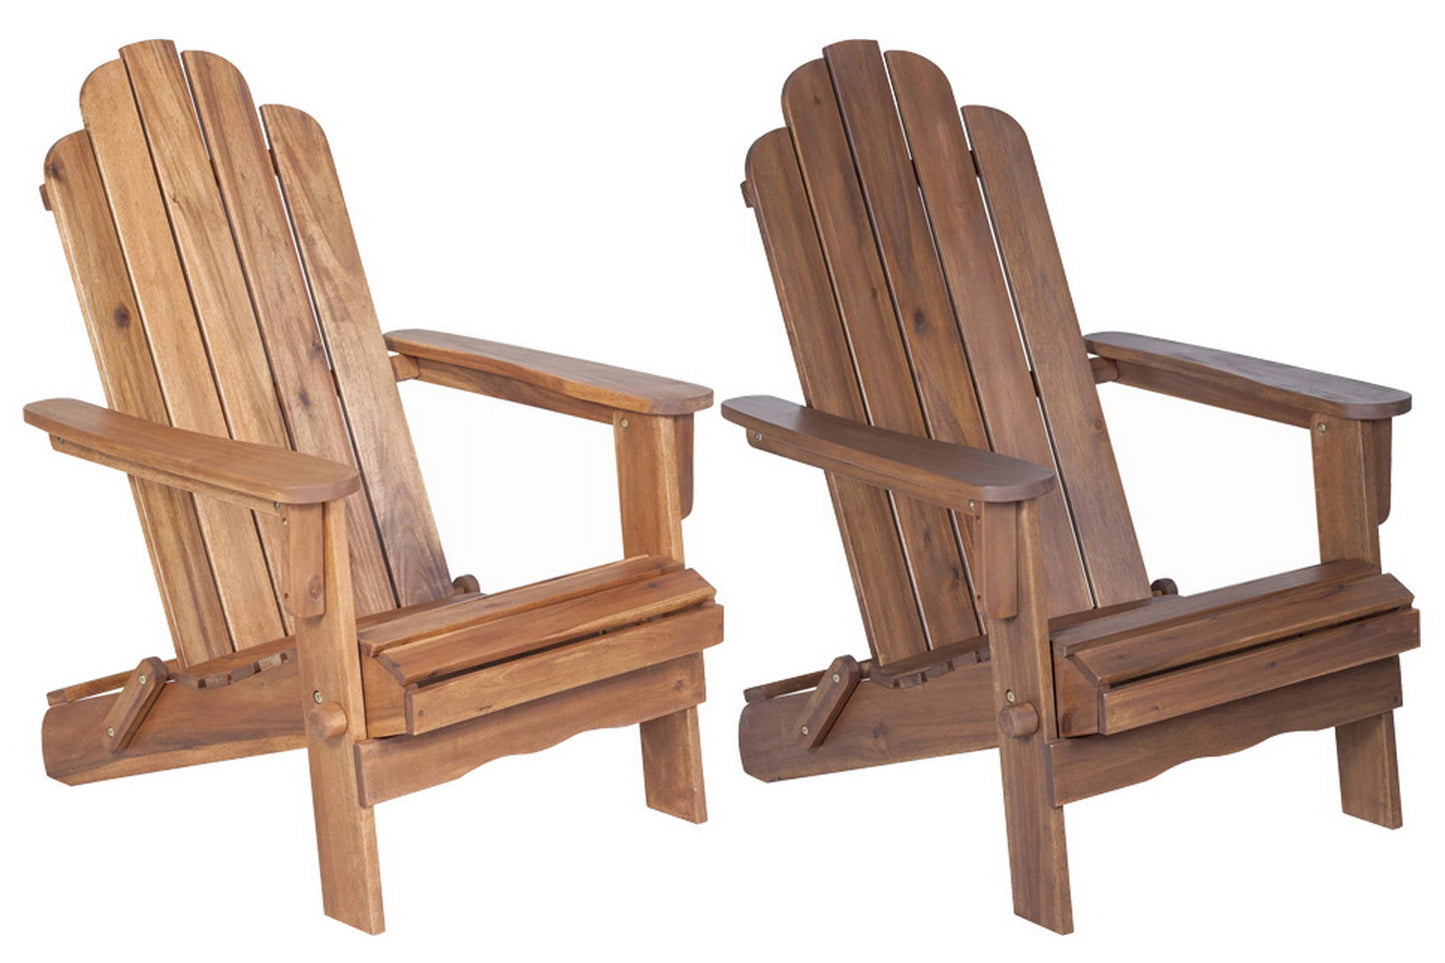 Wooden Folding Adirondack Chair Solid Acacia Wood Weatherproof Outdoor Seating